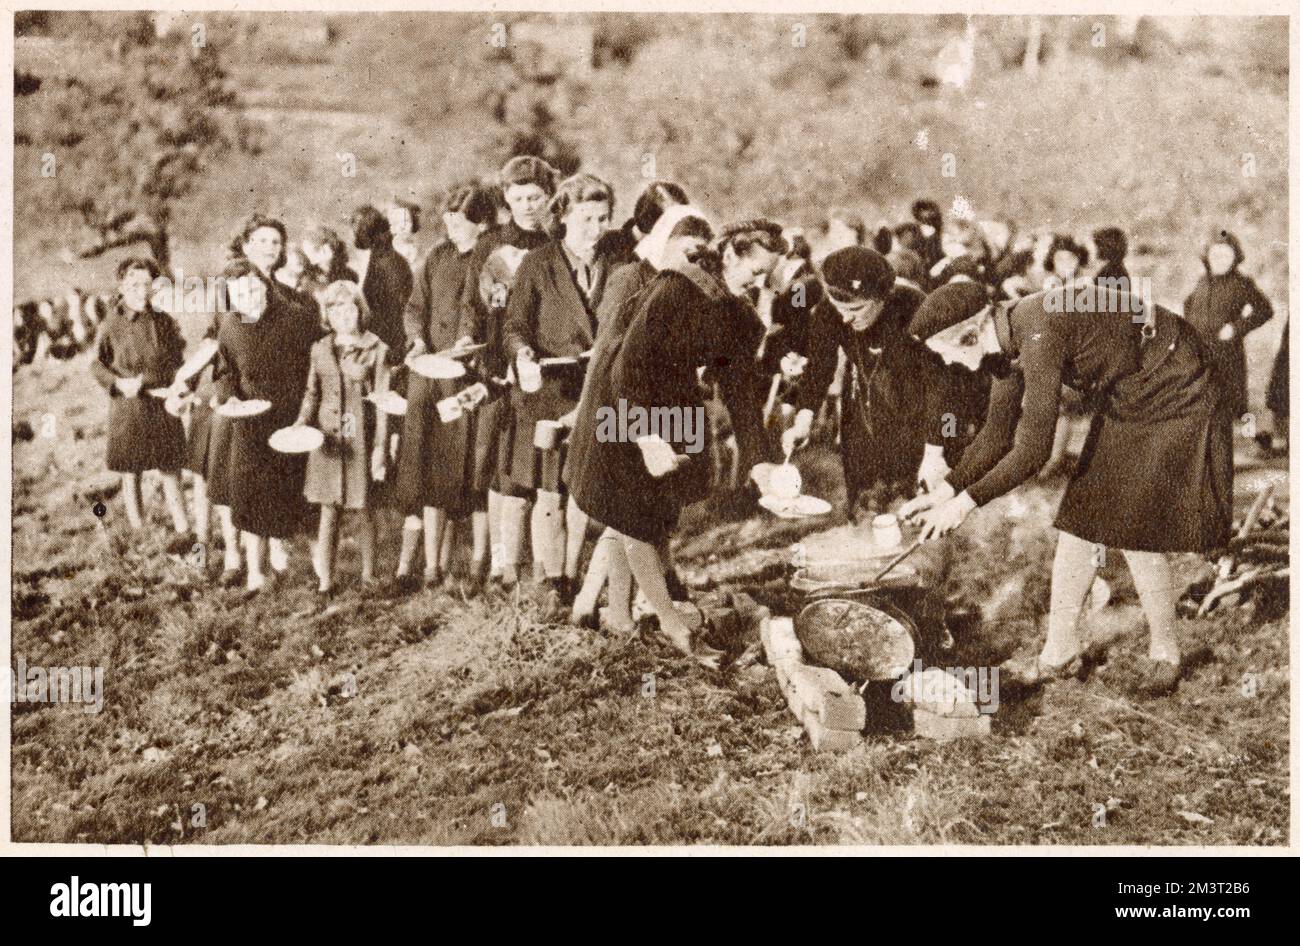 Members of the Guide International Service, rehearsing mass food preparation and serving in the open air. The Guide International Service provided volunteers to work in relief camps in Europe during the Second World War. Stock Photo